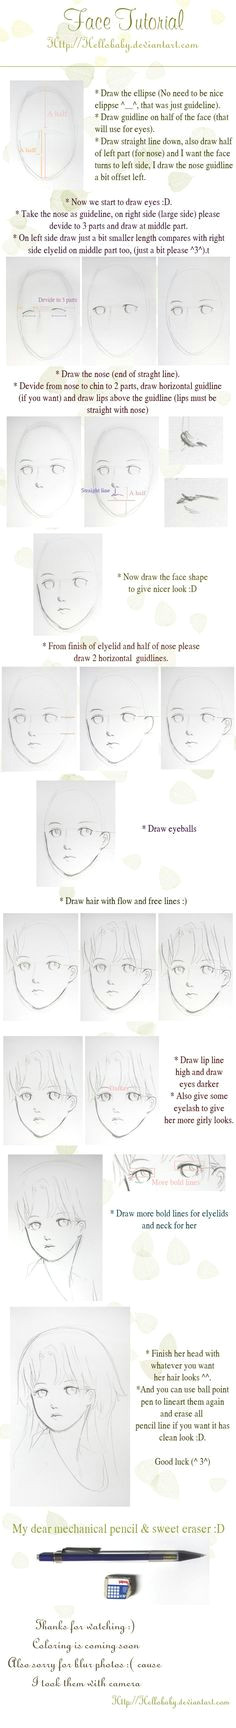 face tutorial hellobaby on deviantart how to draw anime face reference face drawing jpg 236x1728 tutorial